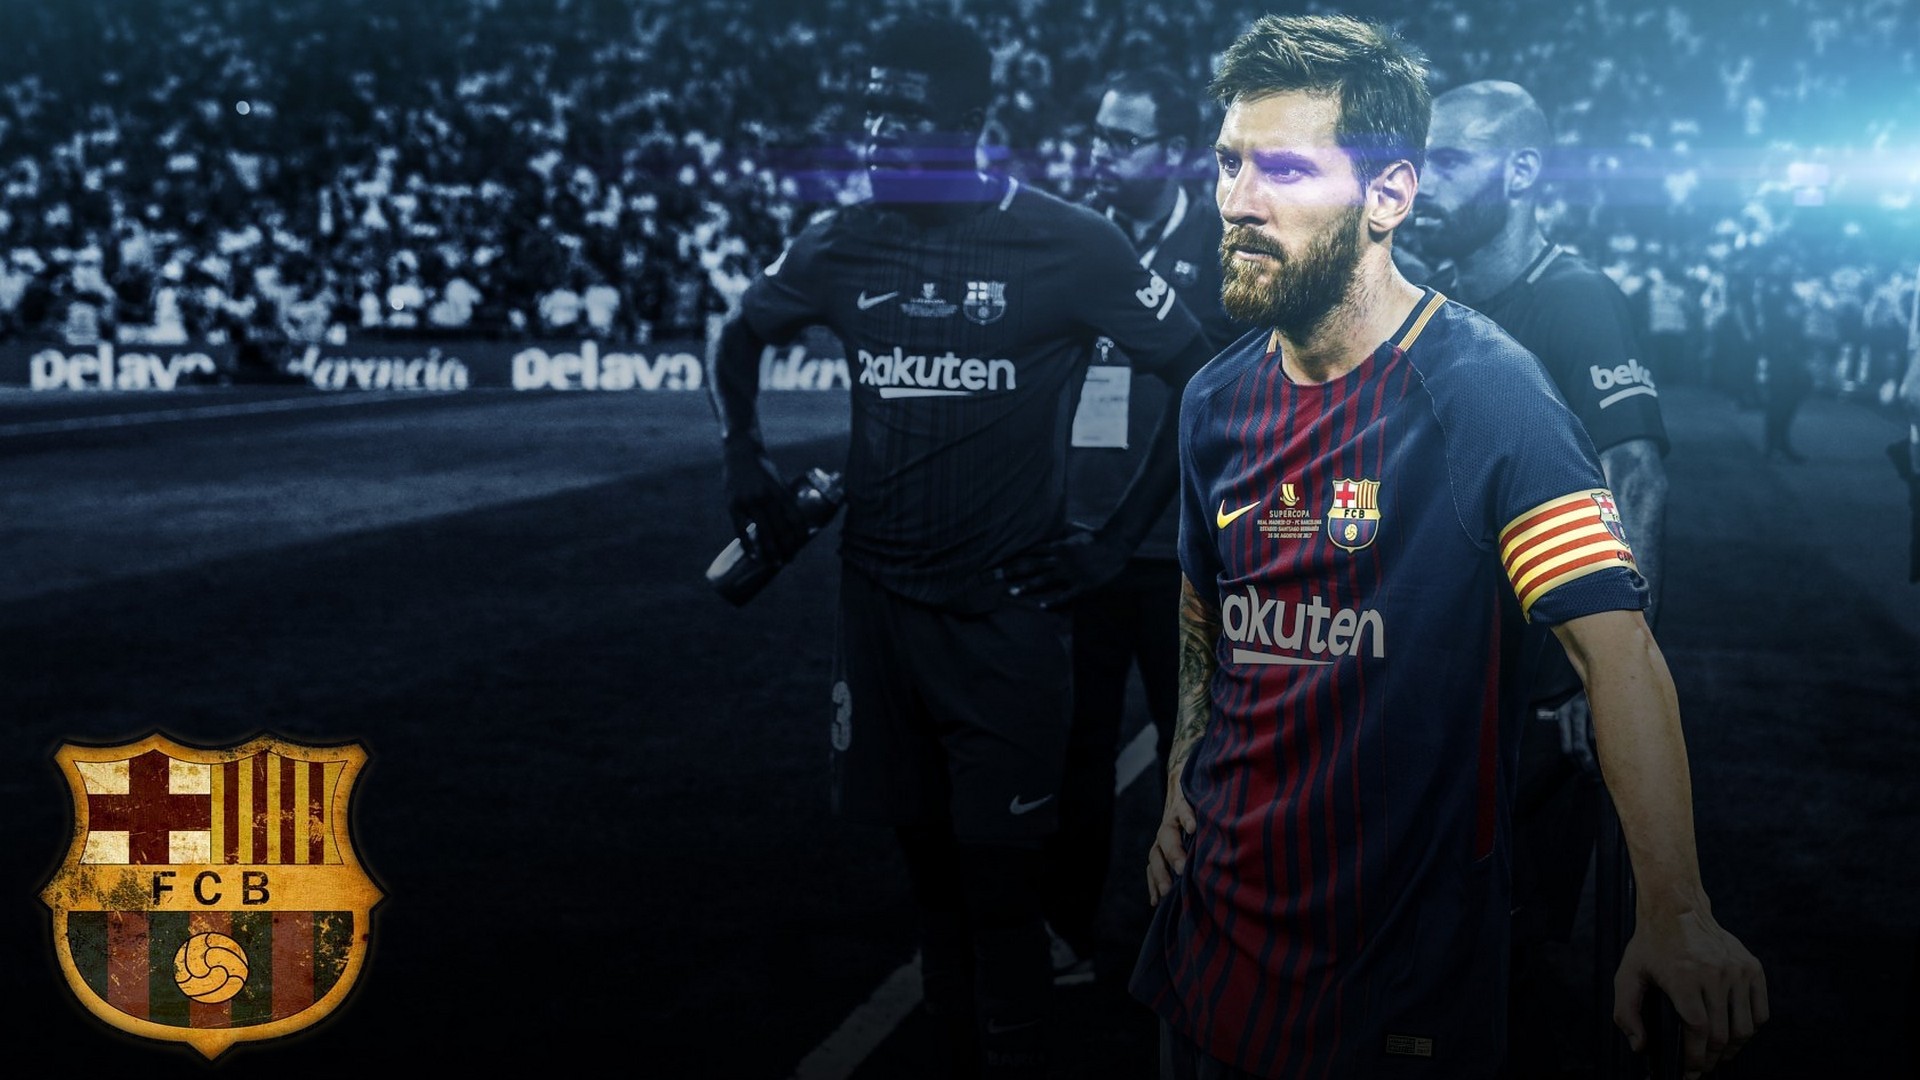 HD Lionel Messi Backgrounds With Resolution 1920X1080 pixel. You can make this wallpaper for your Mac or Windows Desktop Background, iPhone, Android or Tablet and another Smartphone device for free